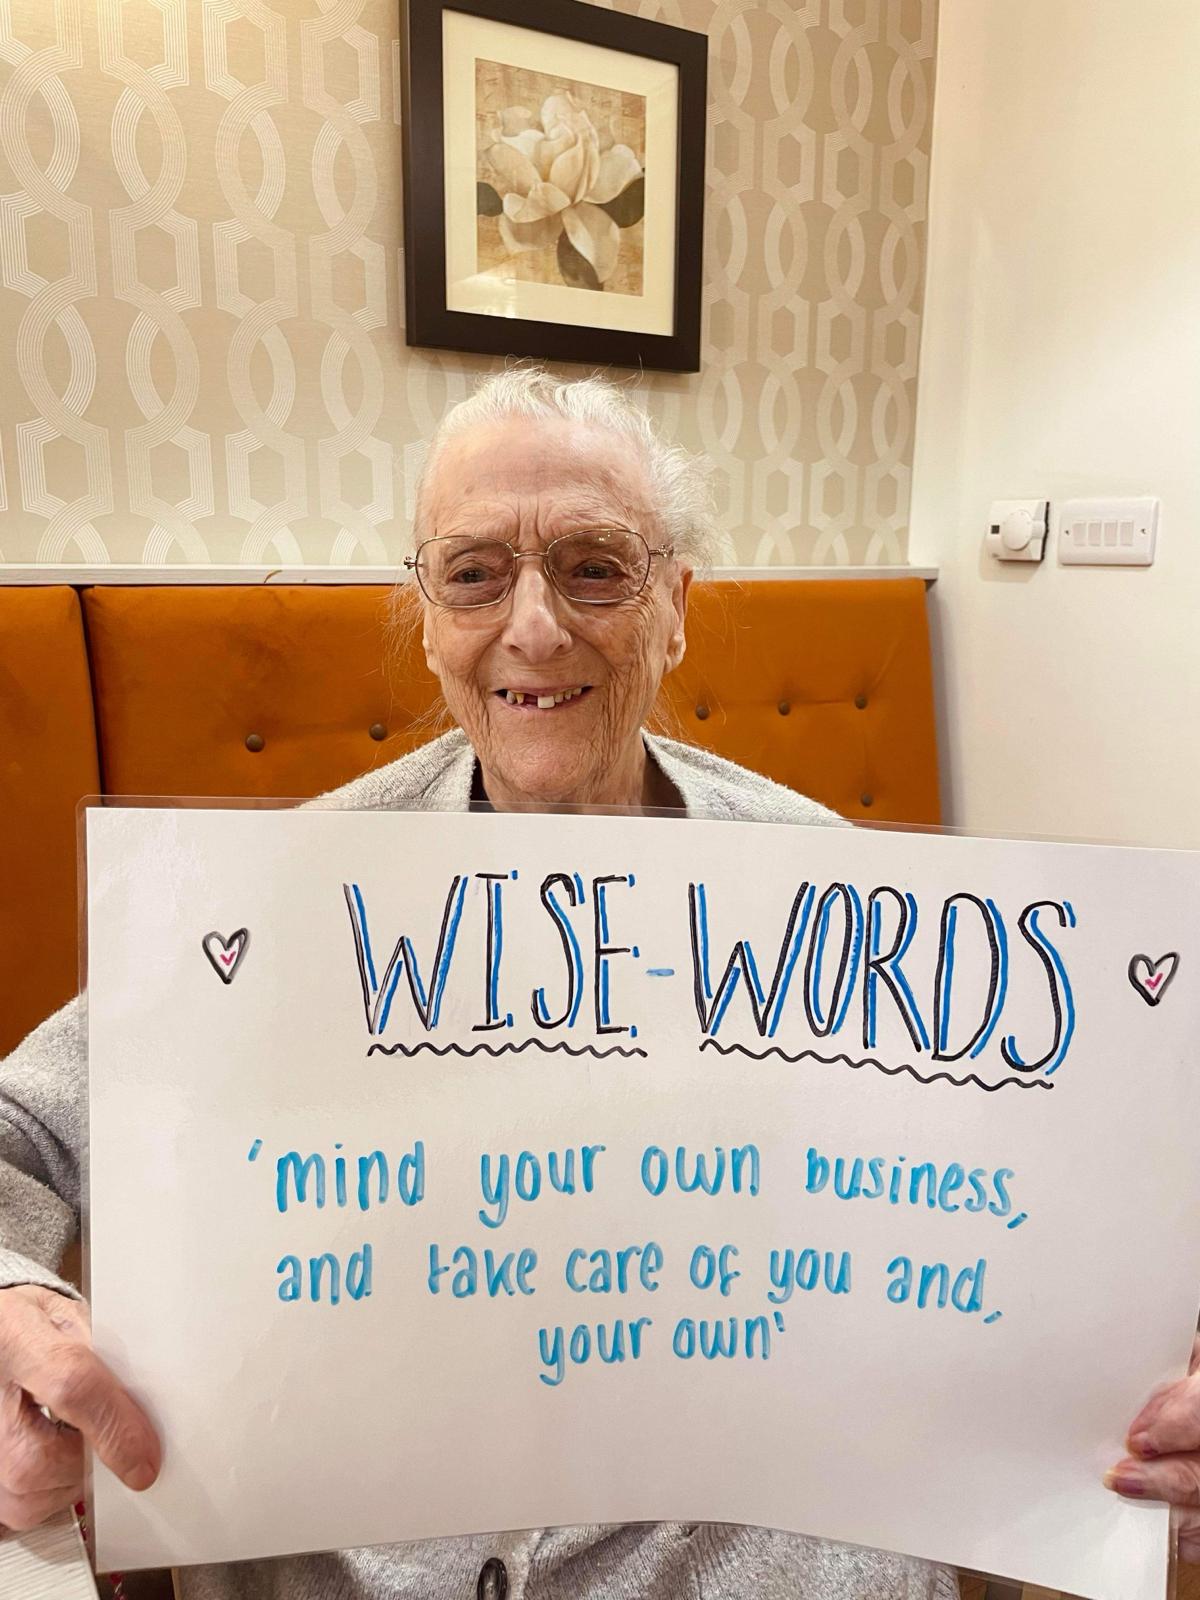 Mind your own business and take care of your own says a resident at St Mary's Riverside Care home on Hessle Foreshore.